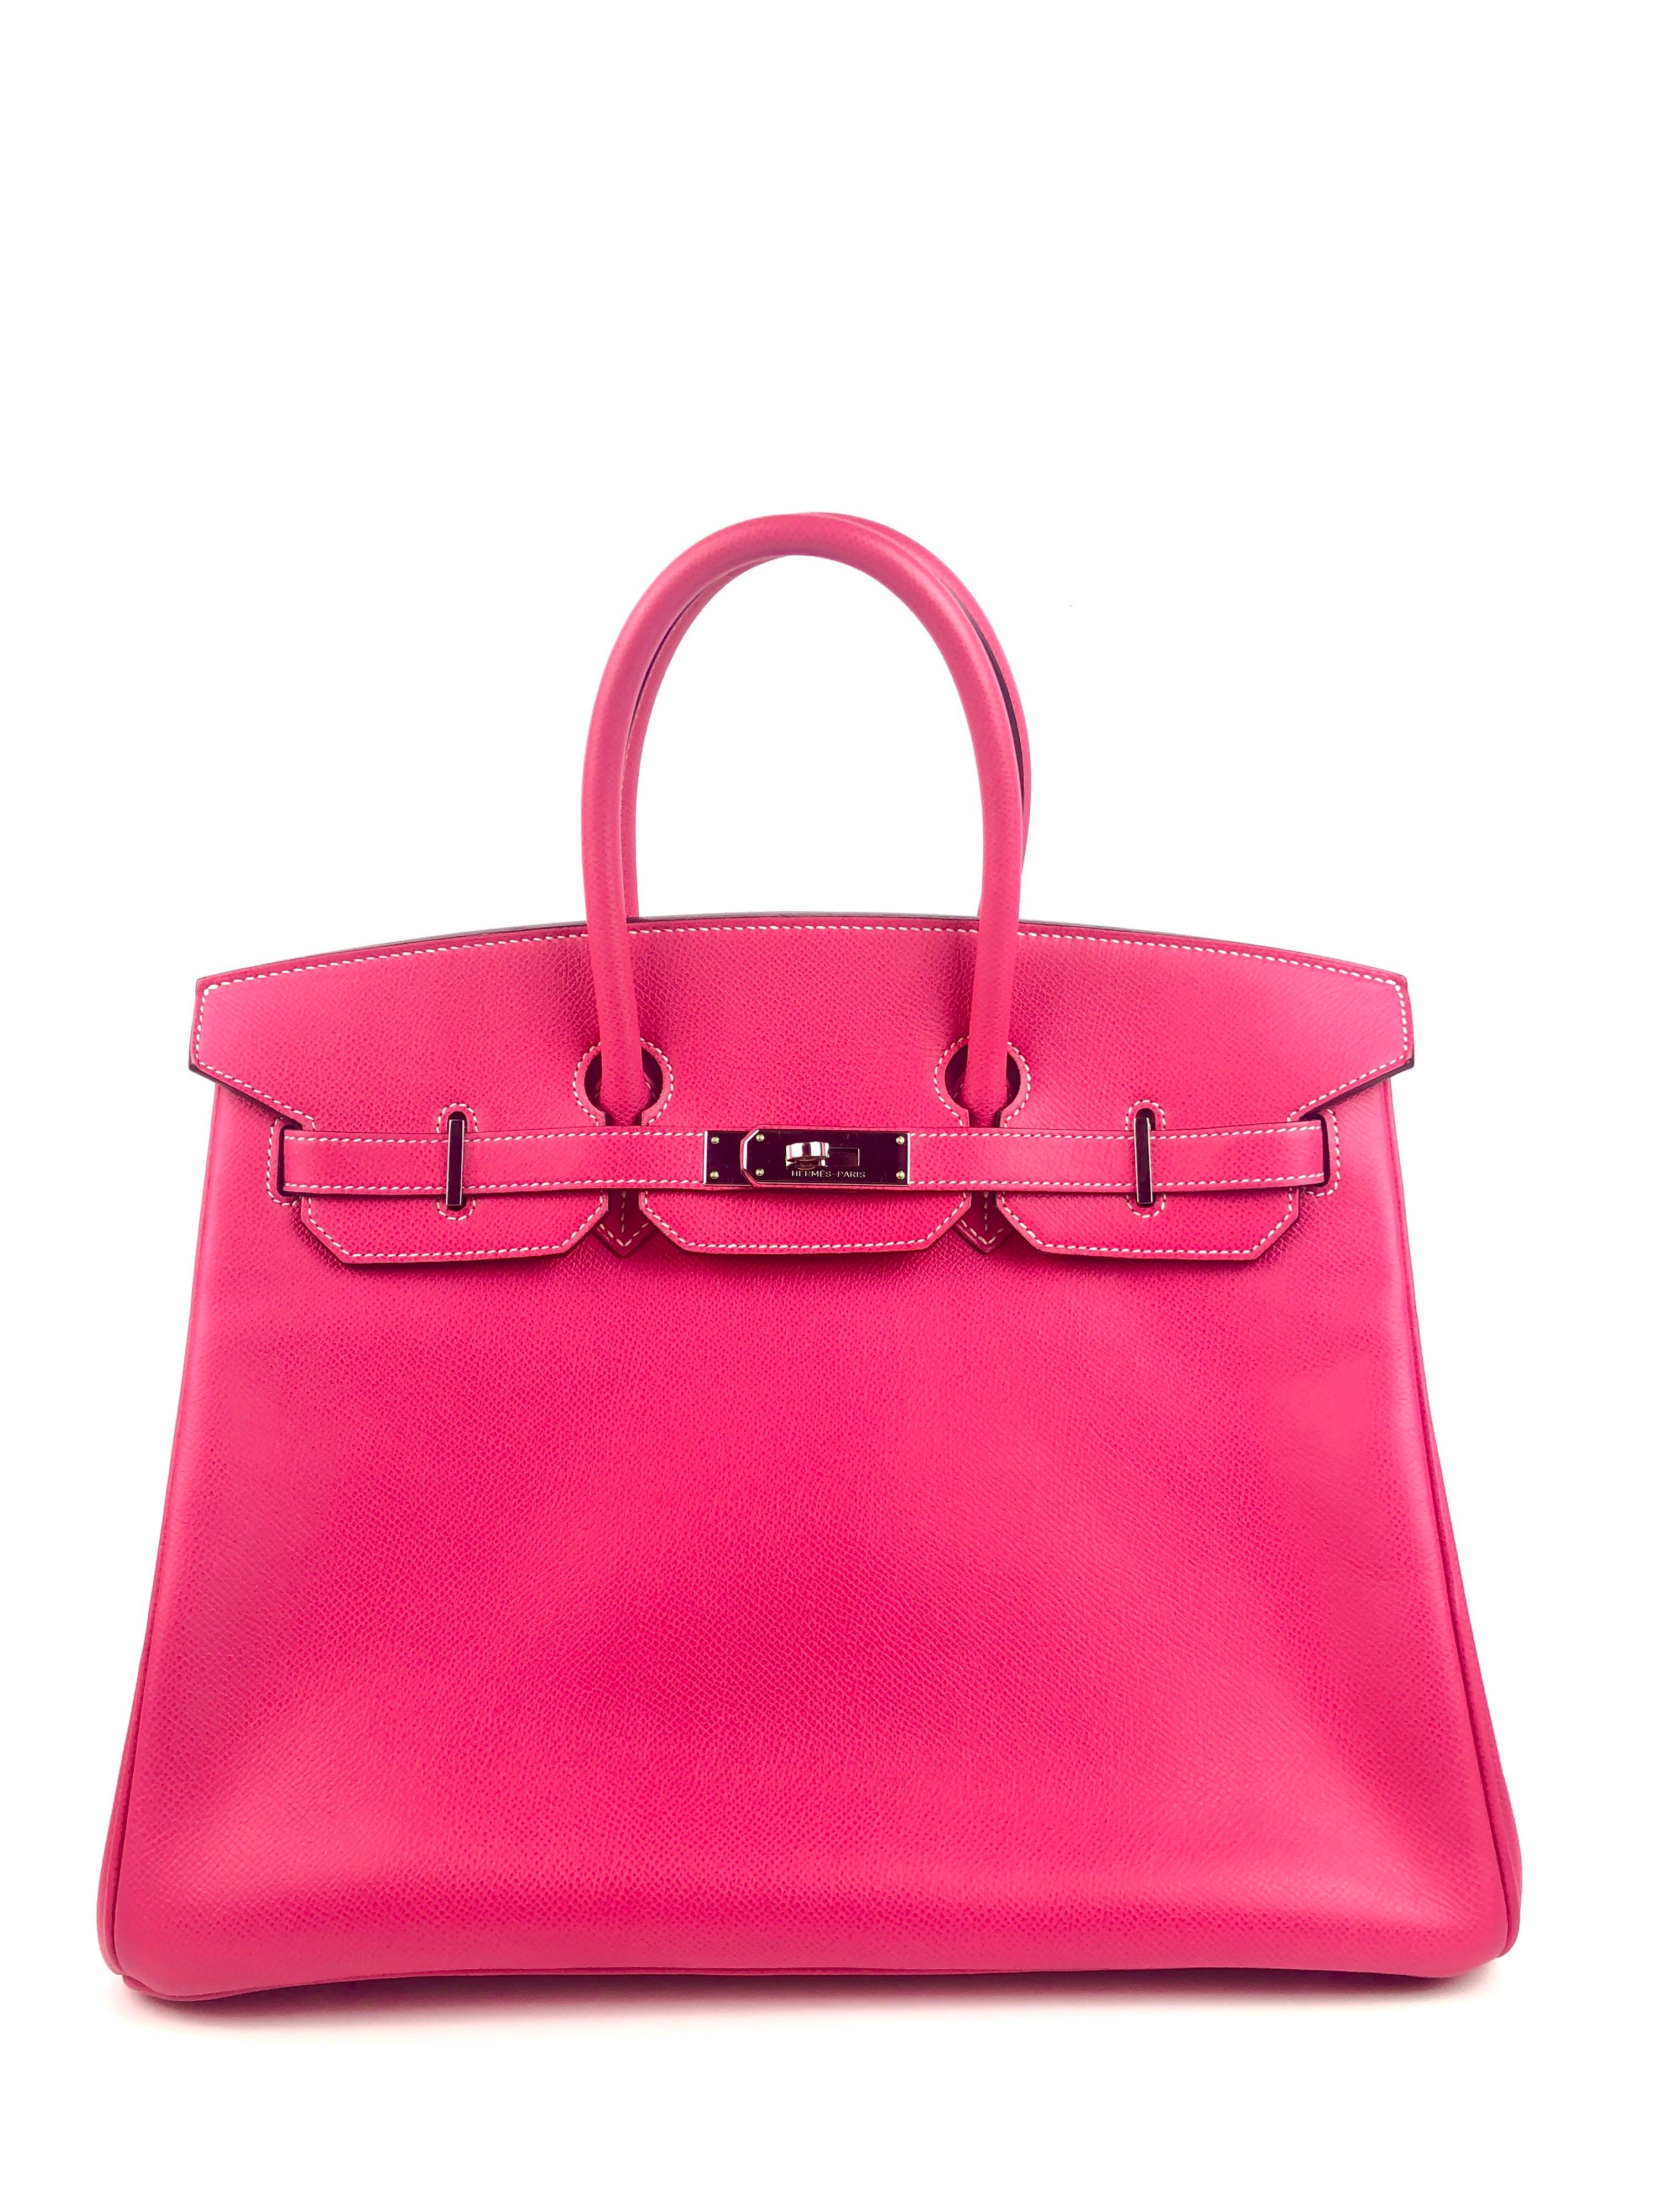 Hermes Birkin 35 Rose Tyrien Pink Epsom Palladium Hardware. Candy Collection with Rubis Interior. Excellent Condition, light hairlines on hardware, excellent corners and structure. P stamp 2012. 

Shop with confidence from Lux Addicts. Authenticity